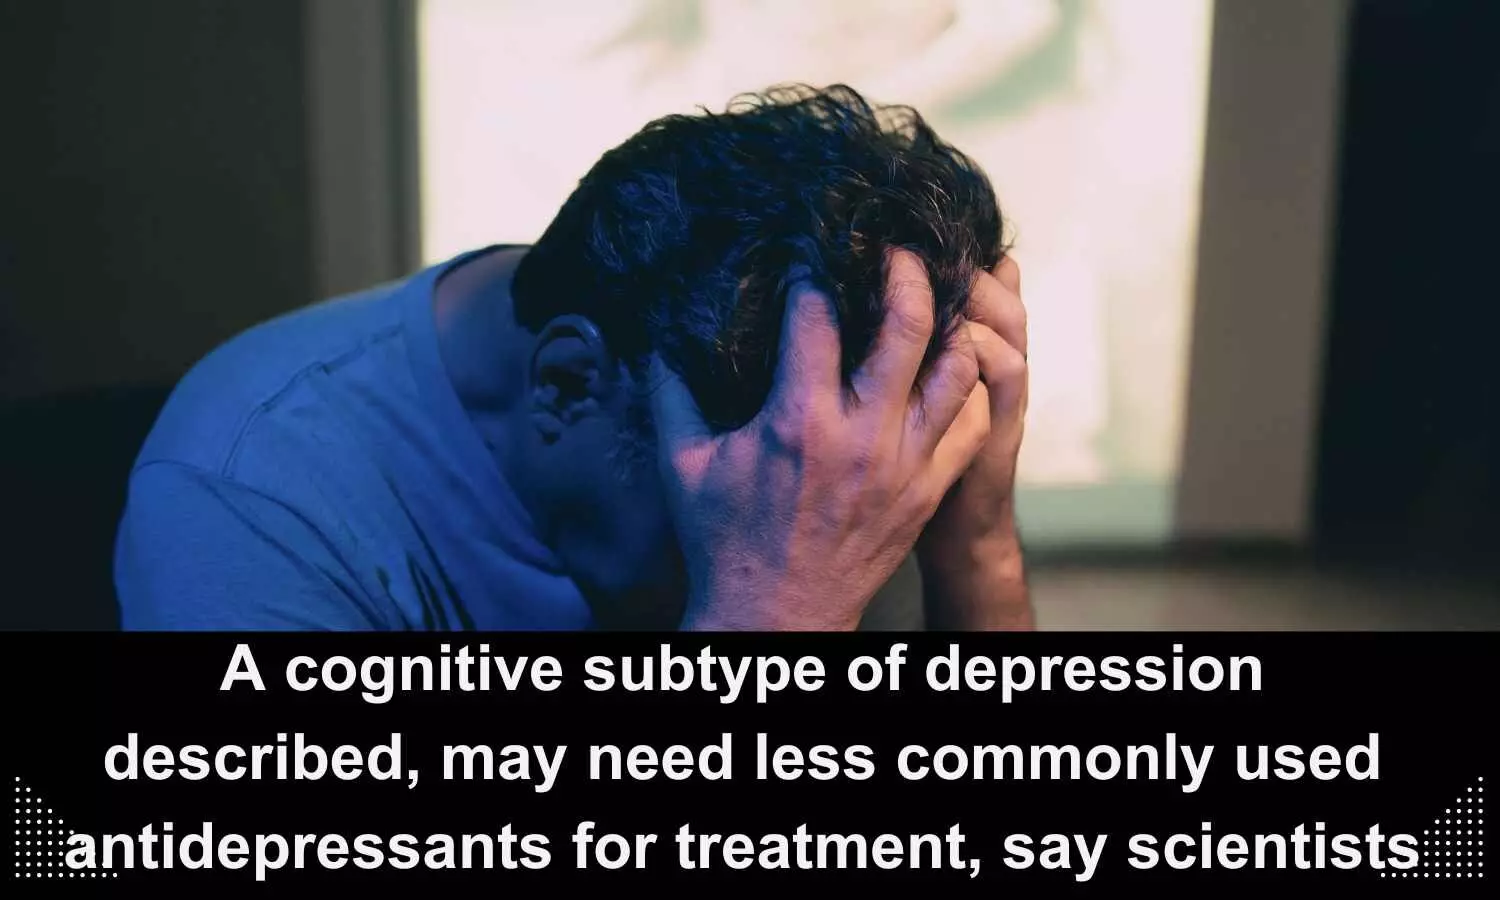 A cognitive subtype of depression described, may need less commonly used antidepressants for treatment: Scientists